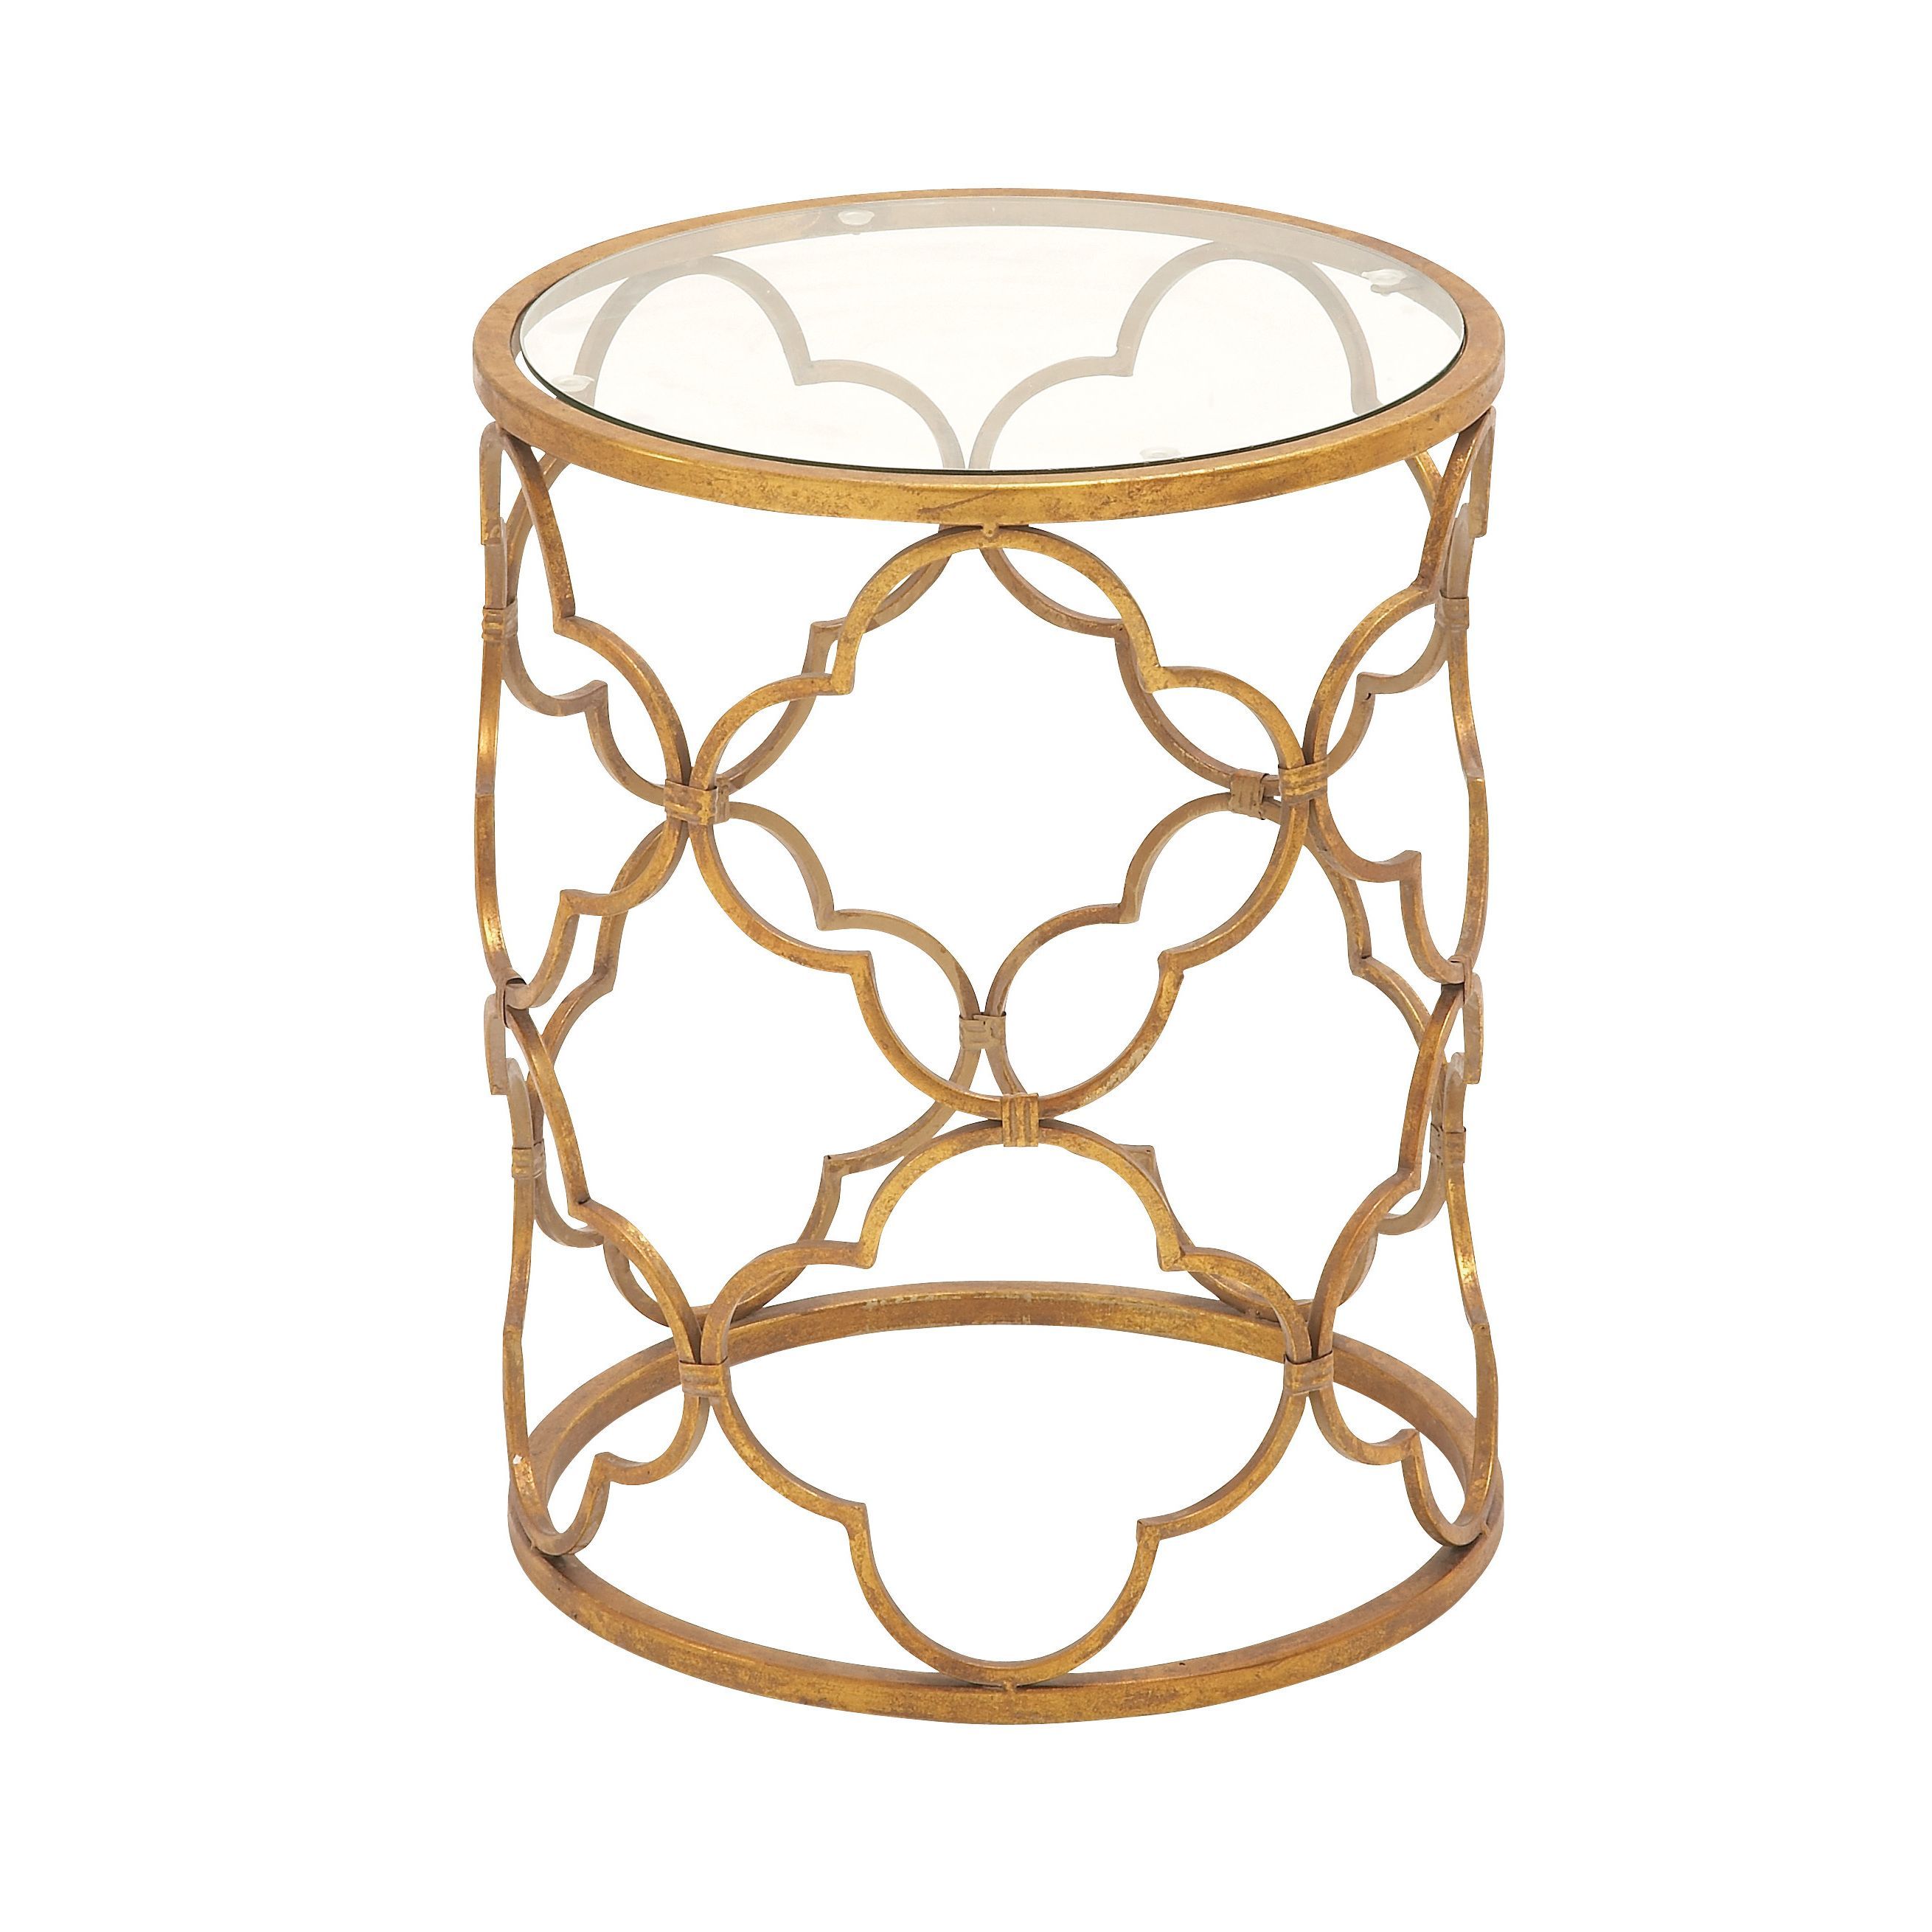 bring style your home while adding practical table space clarissa metal accent with this distinctive piece the ornate goldtone base features open geometric skinny glass tall